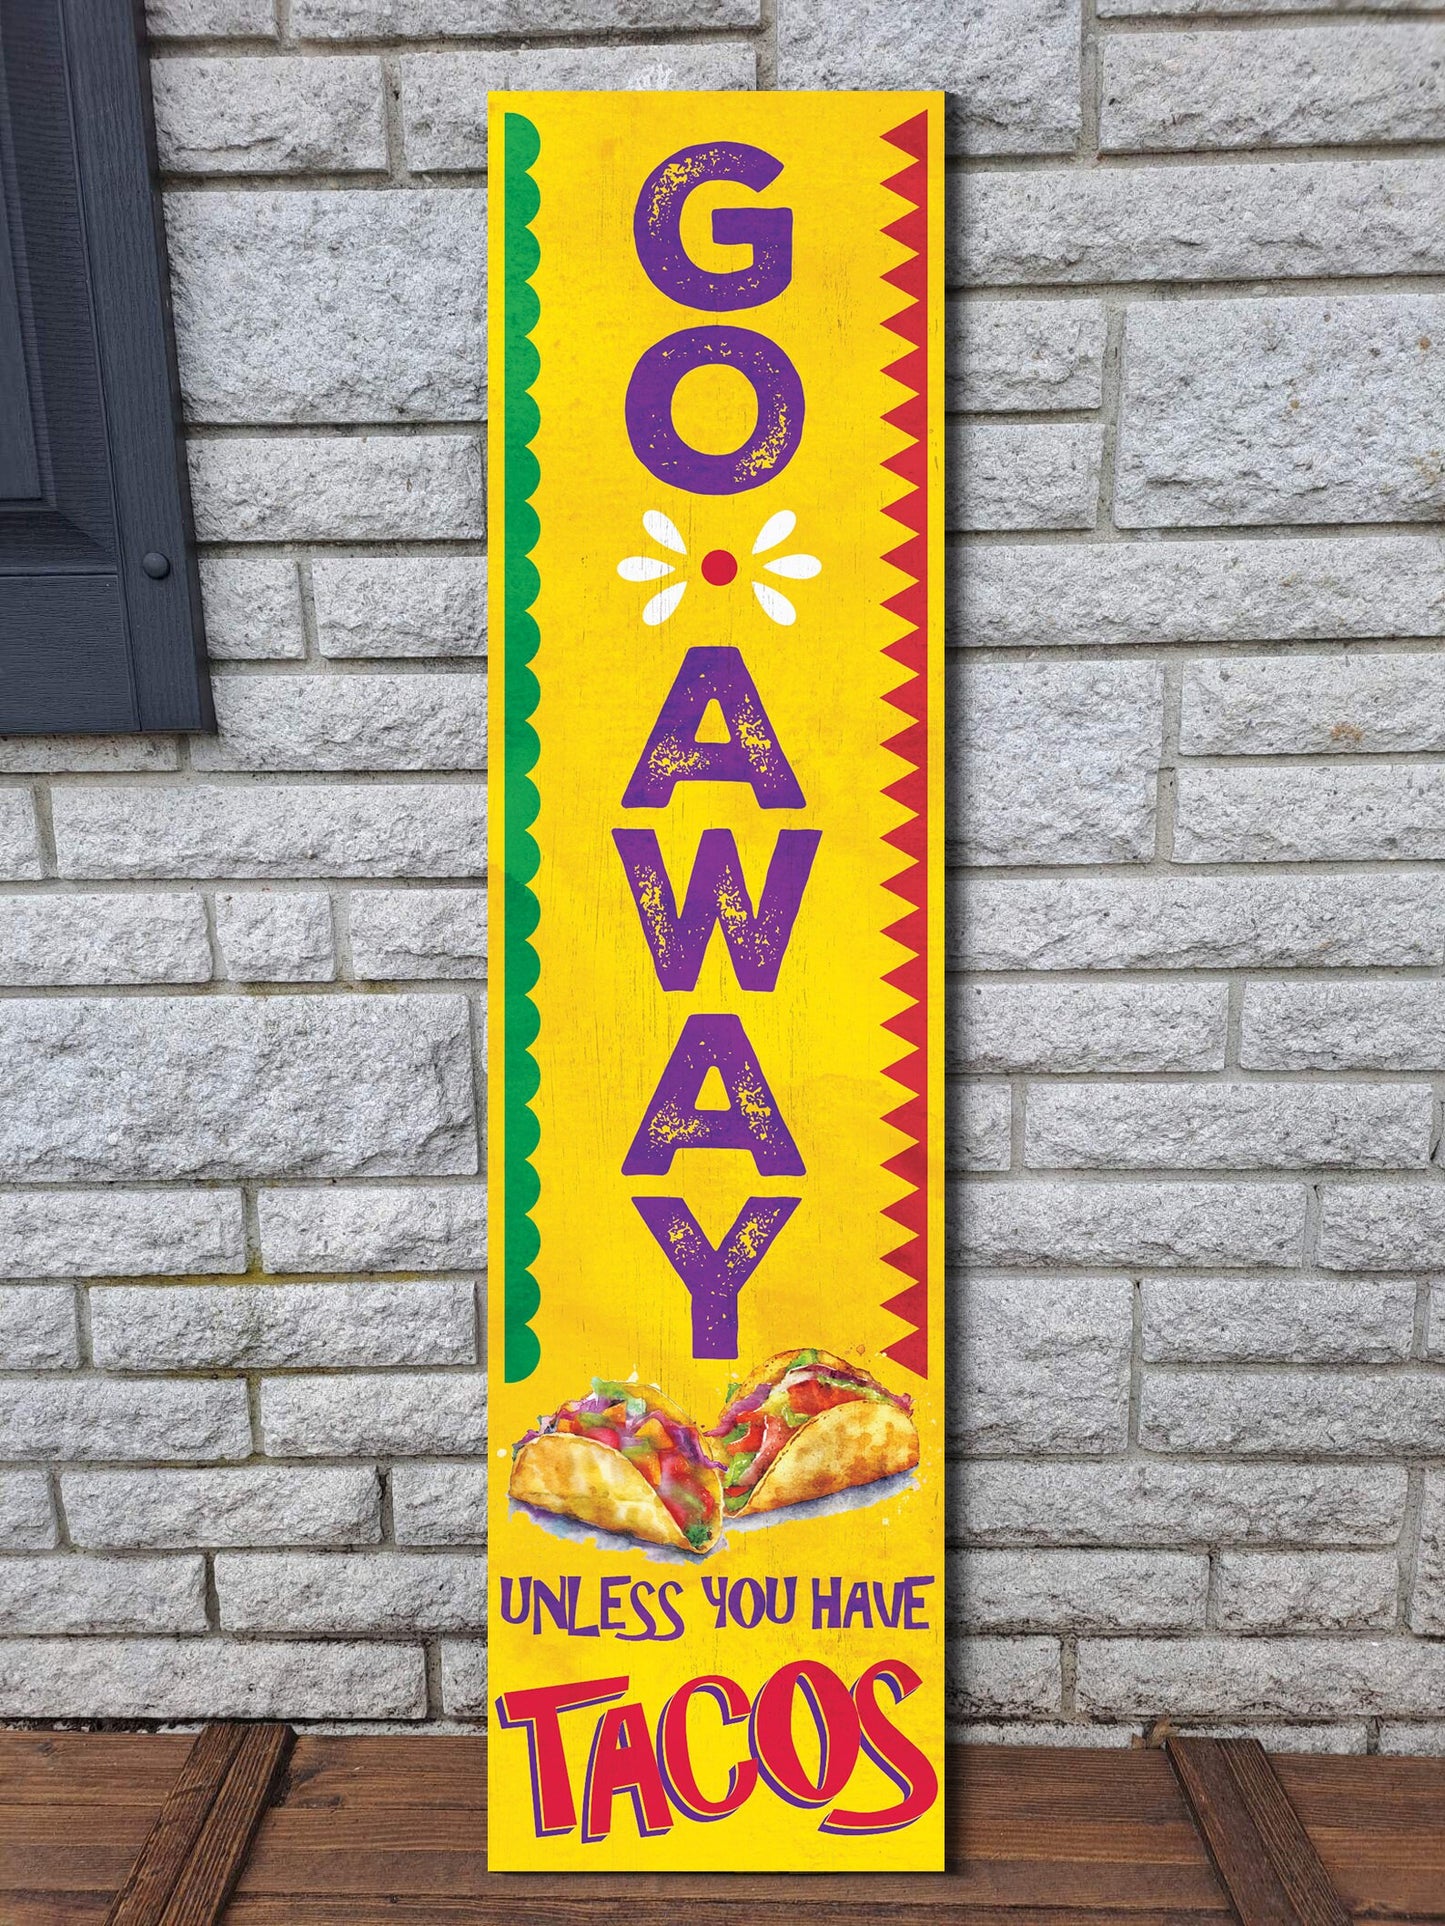 36in Humorous Wooden Sign "Go Away Unless You Have Tacos", Funny Wall Decor for Home, Office, or Kitchen